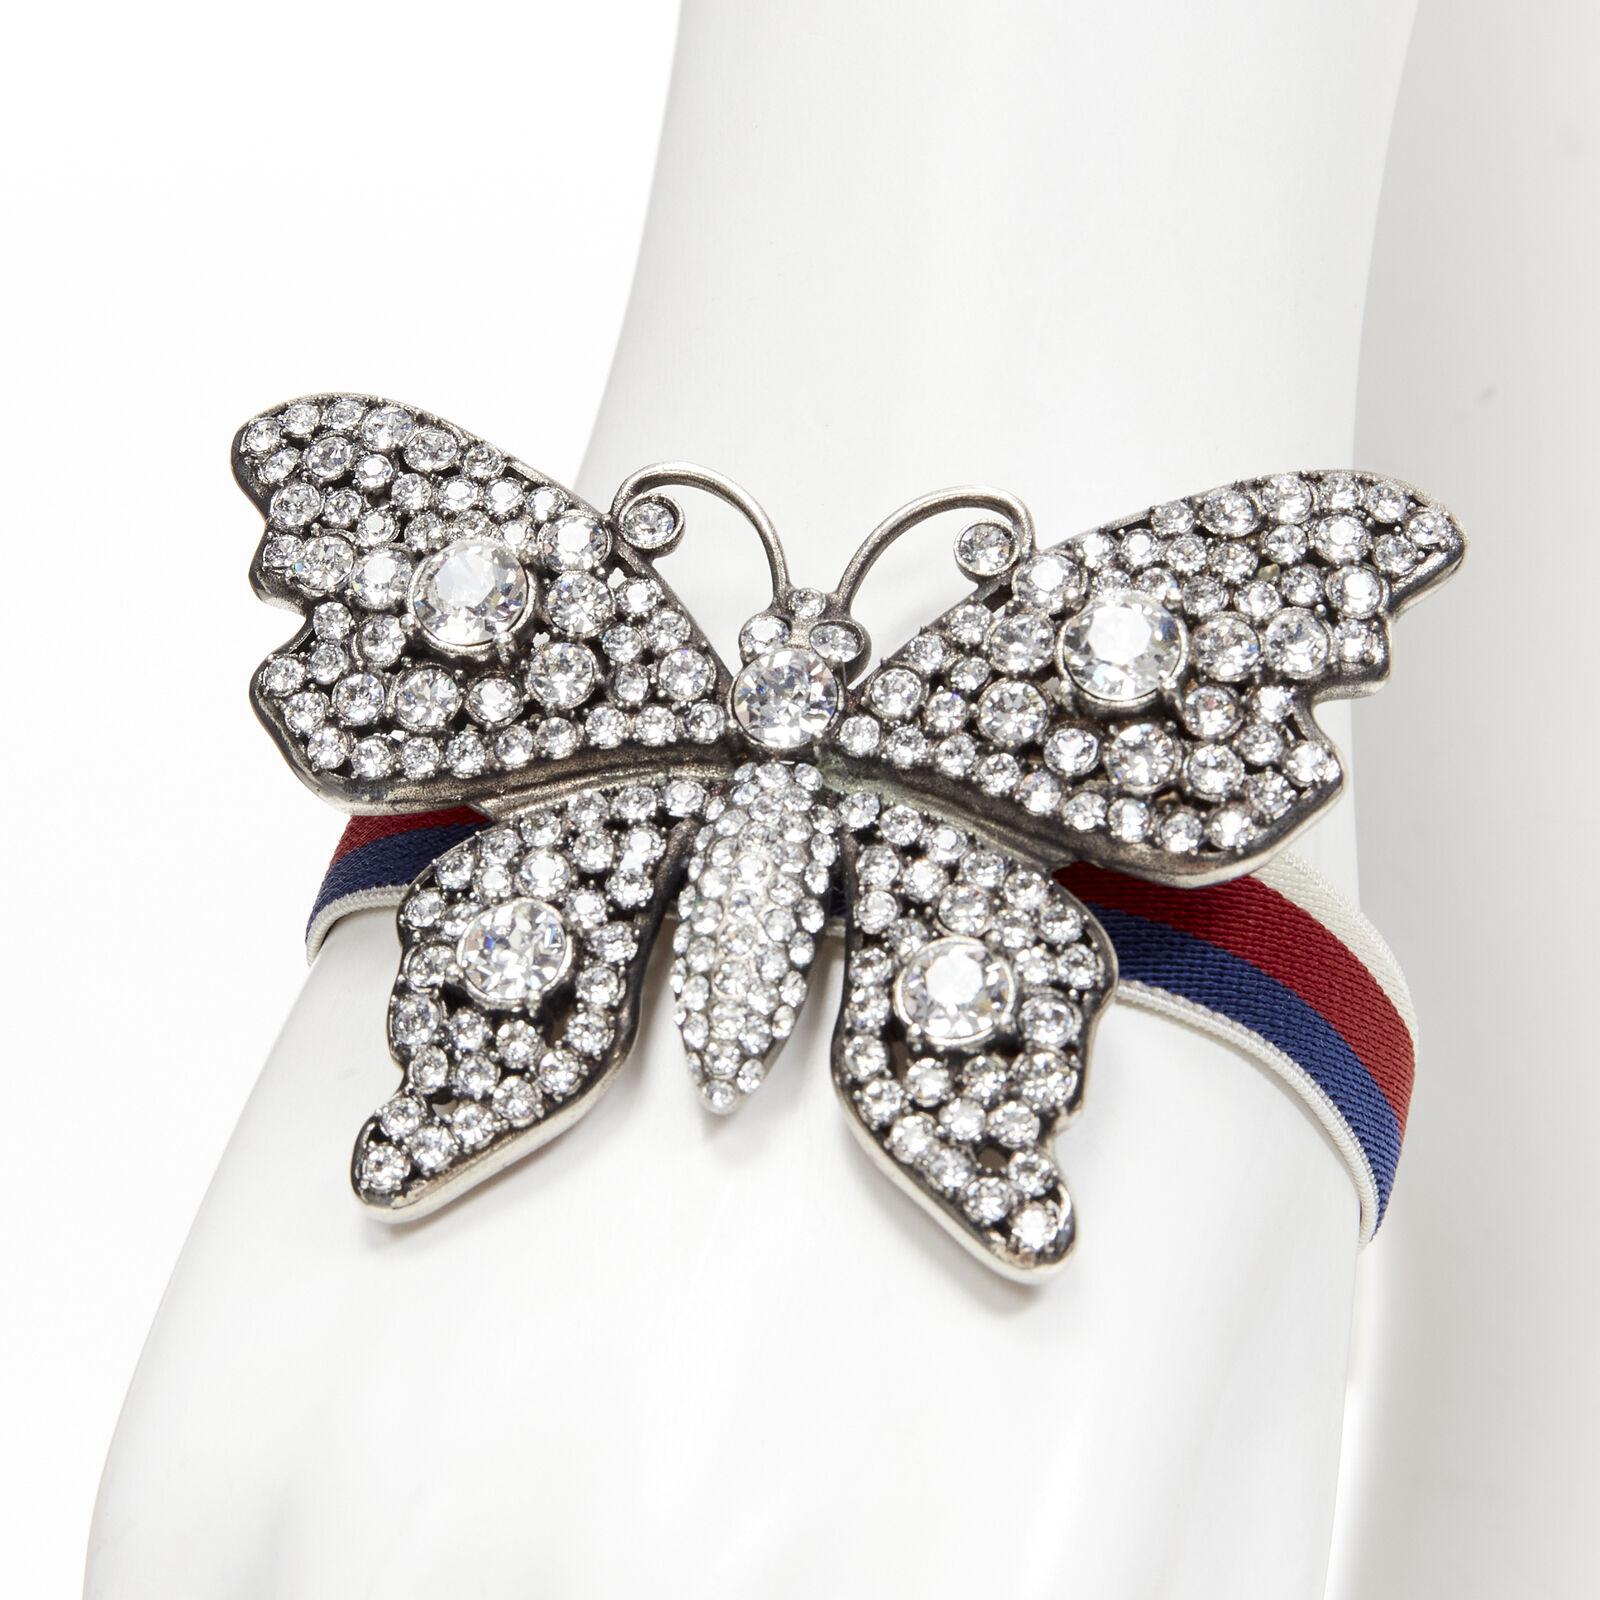 GUCCI ALESSANDRO MICHELE antique silver crystal Butterfly web strap bracelet
Reference: TGAS/C01500
Brand: Gucci
Designer: Alessandro Michele
Model: 504656 I3N78 8518
Material: Metal, Fabric
Color: Silver
Pattern: Solid
Closure: Stretchy
Extra